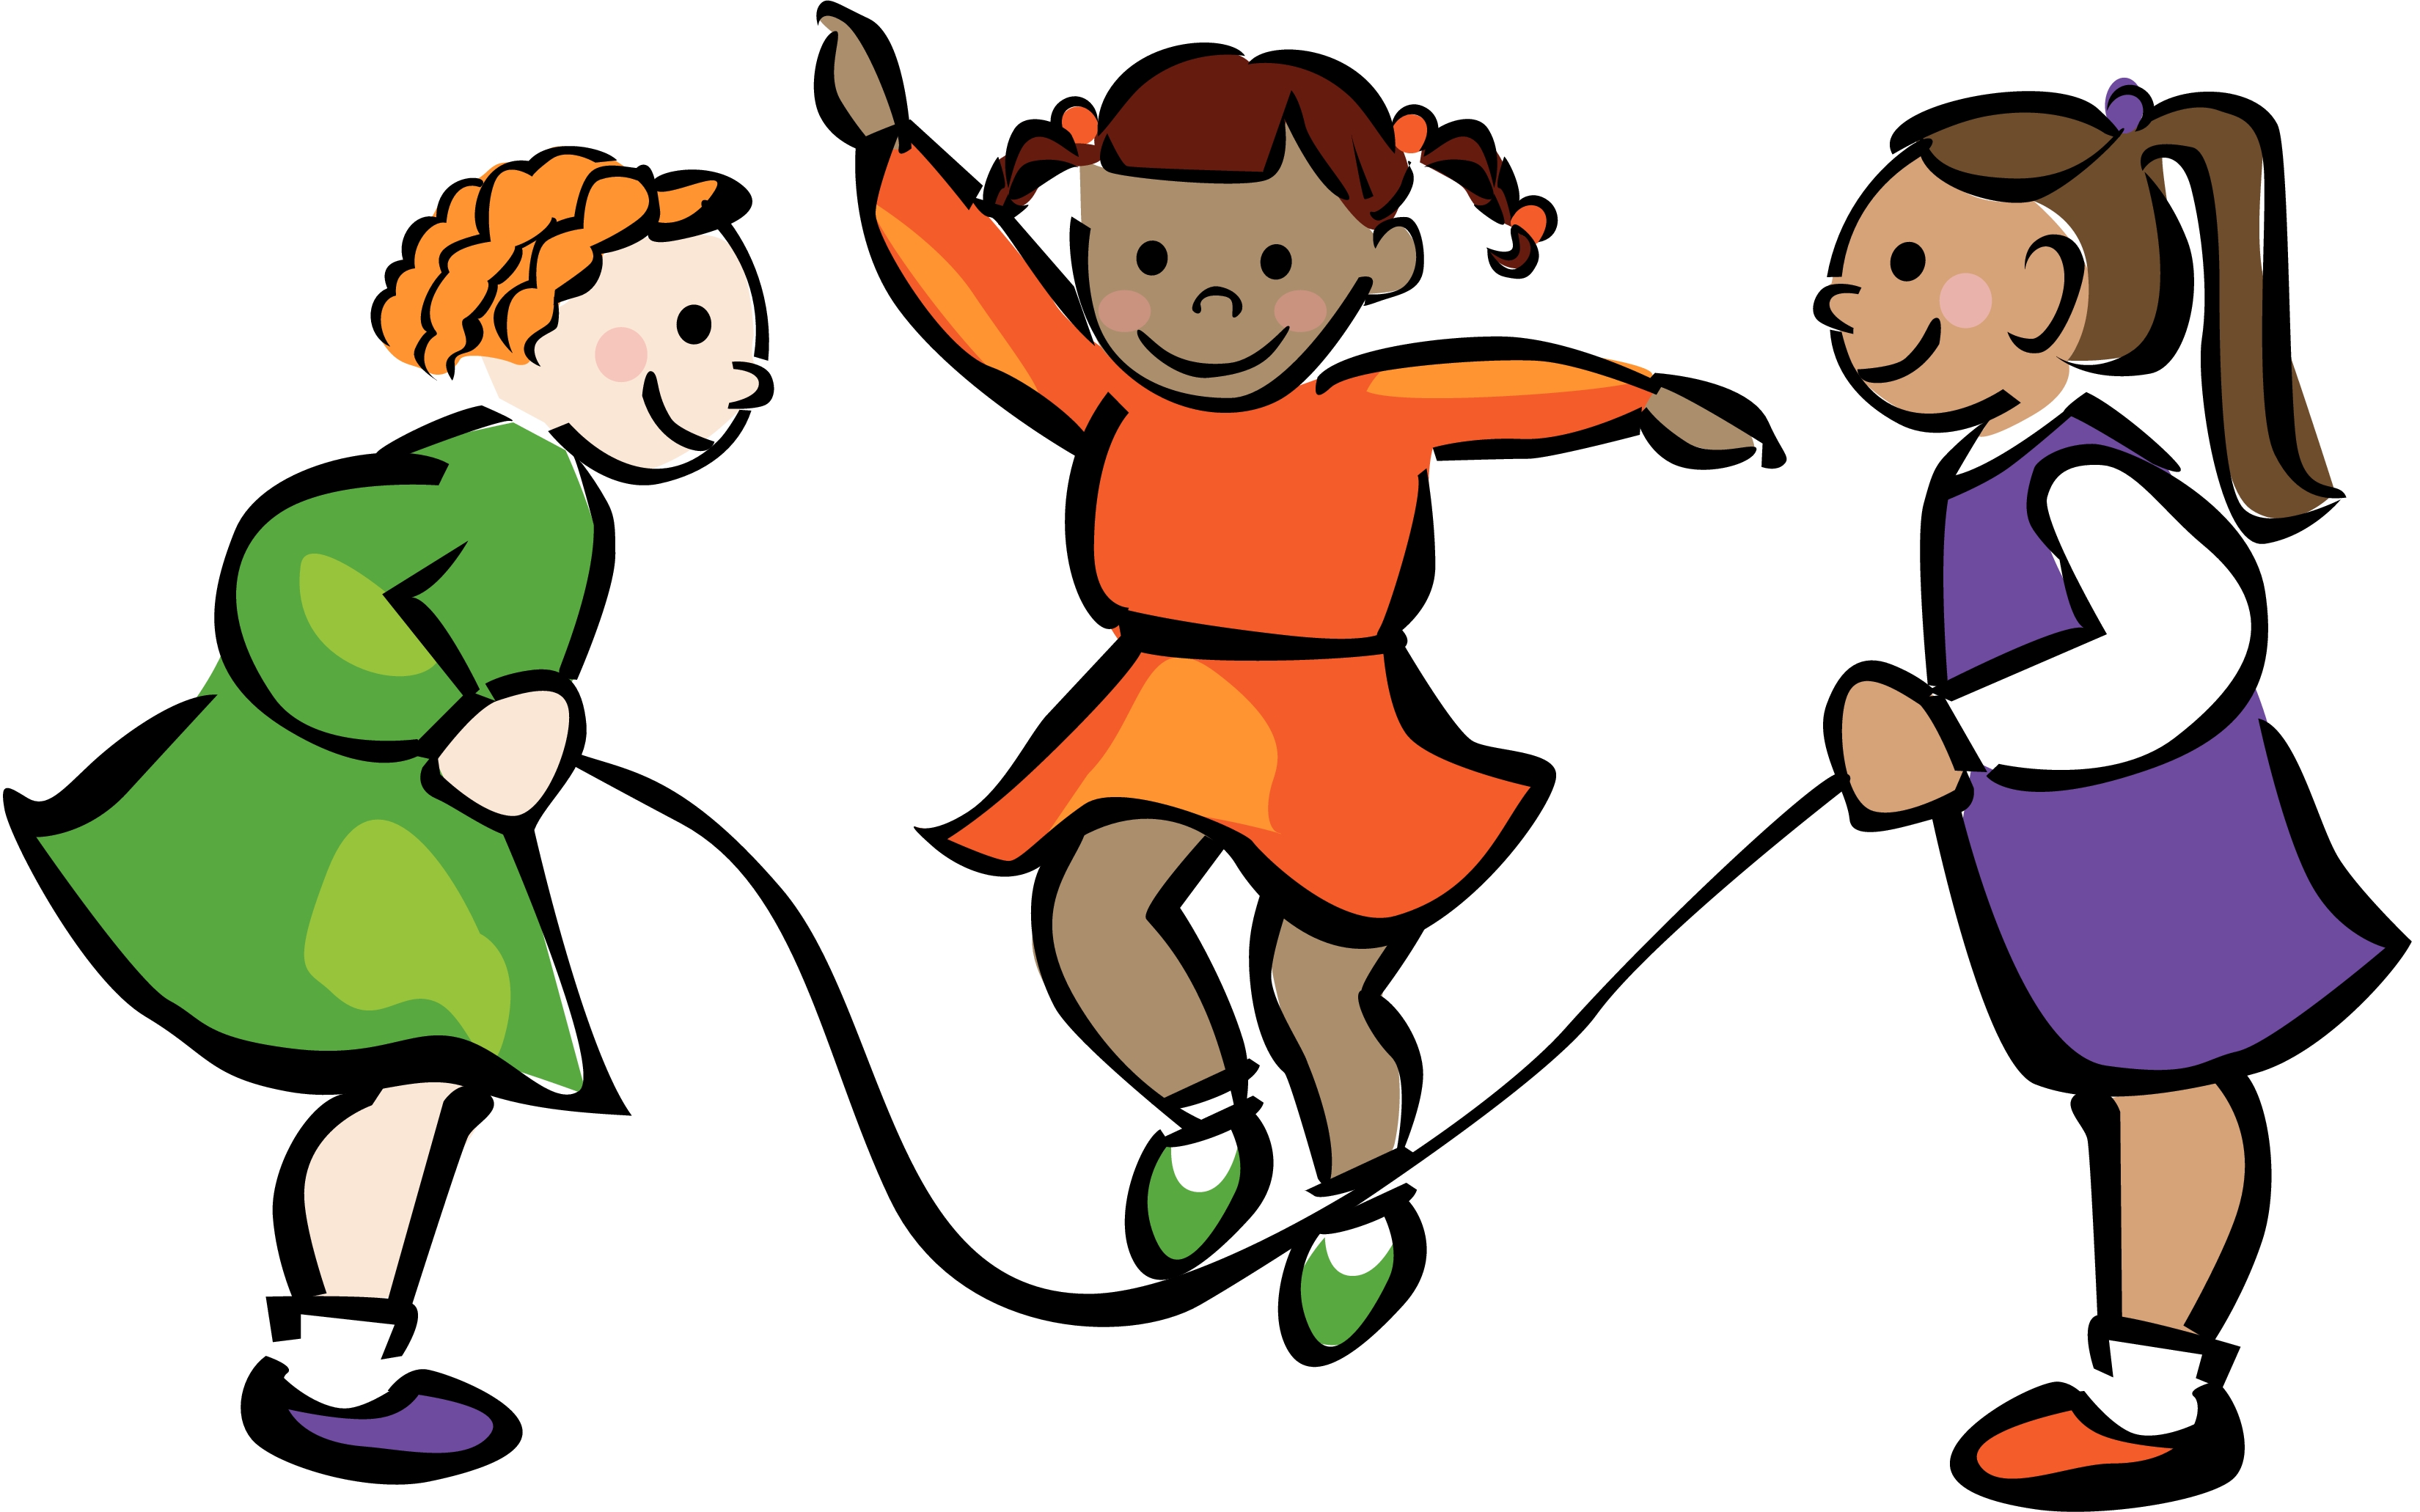 Clip Arts Related To : jump rope sport clipart. 